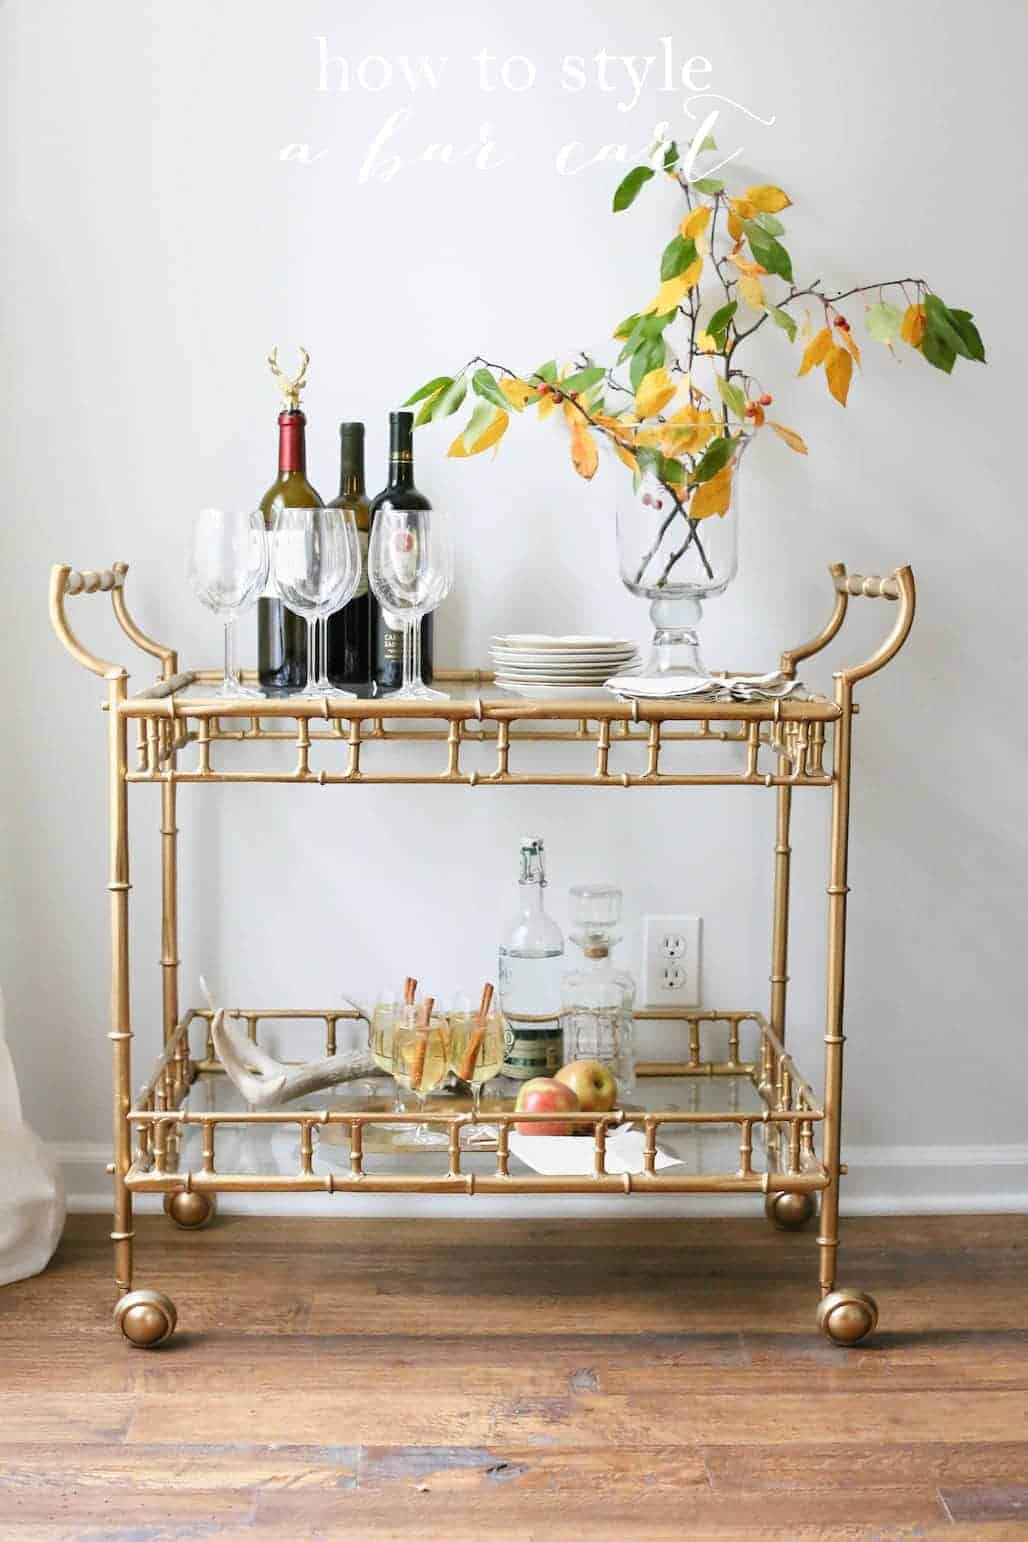 A brass bar cart with liquor bottles and glassware on top.